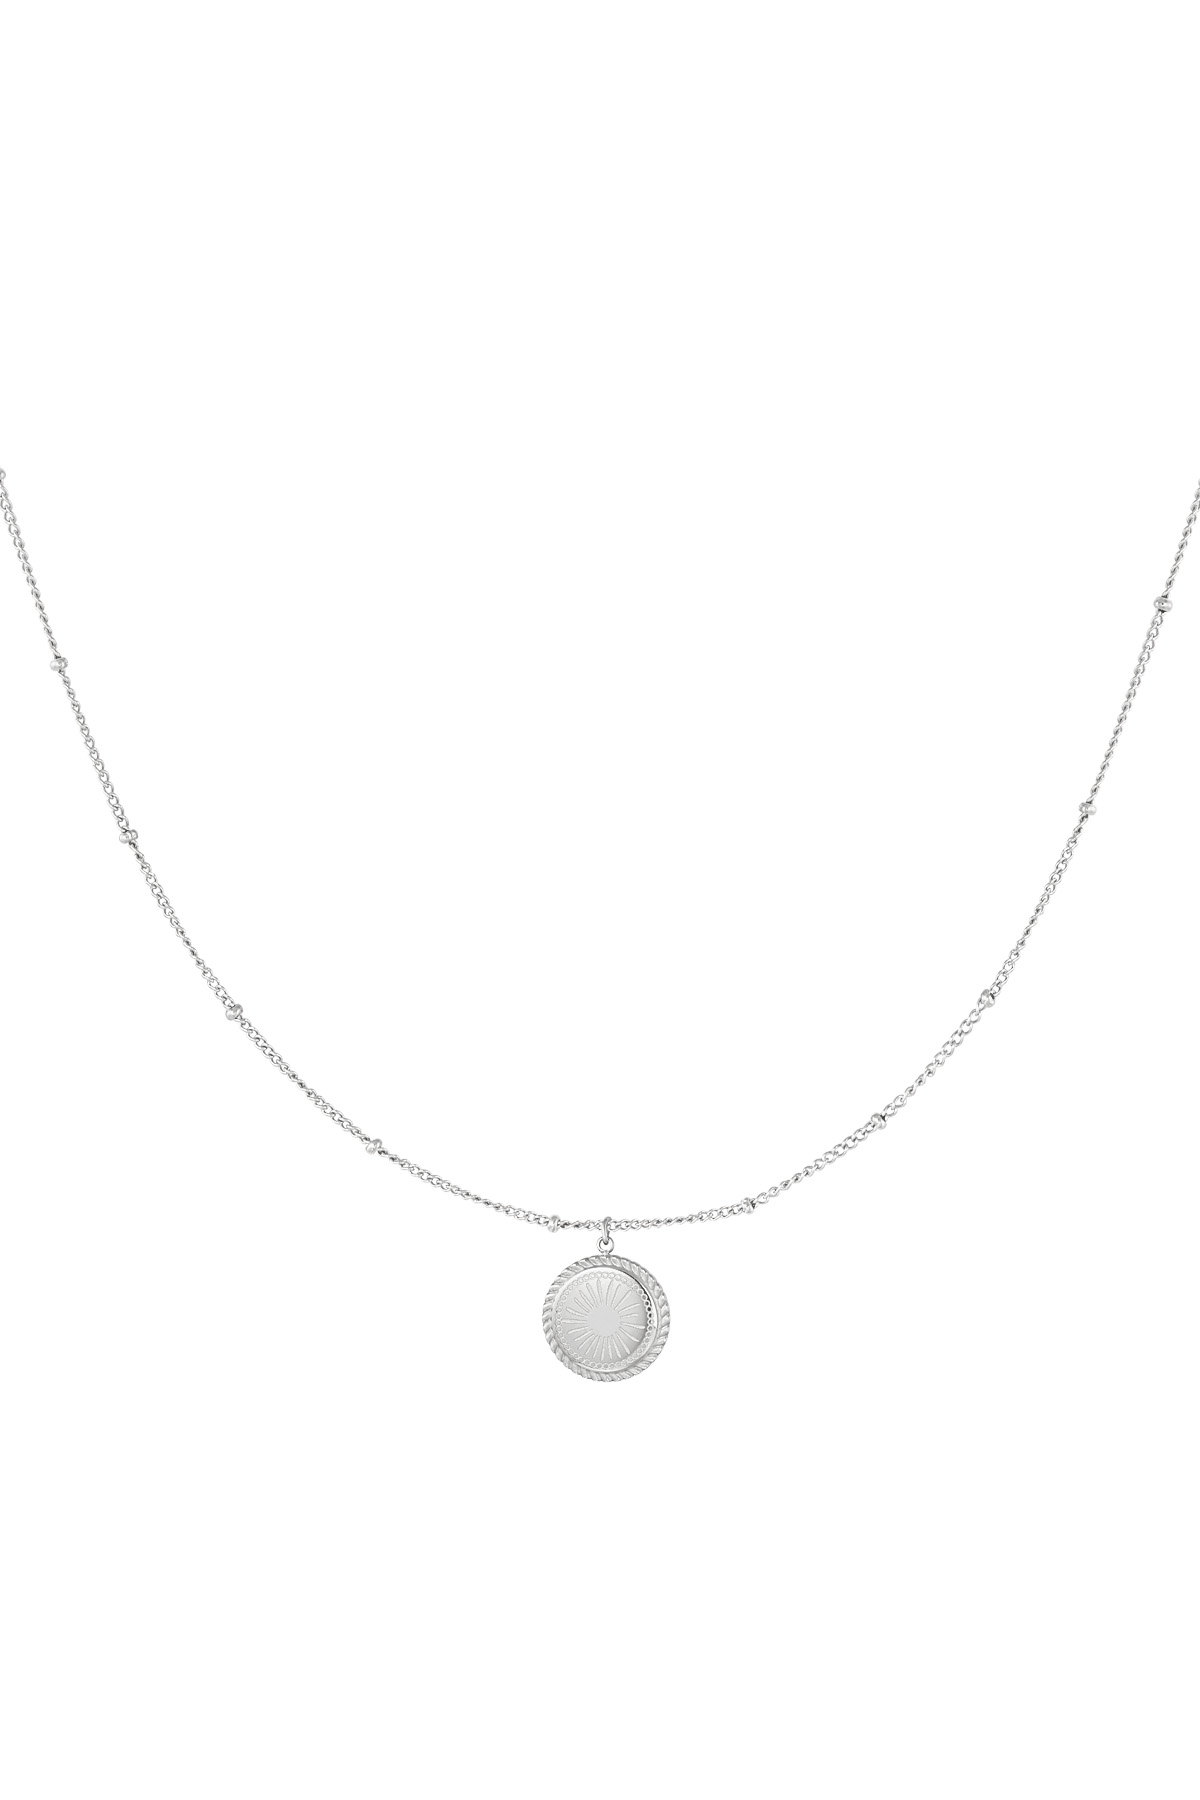 Ketting dubbele ronde coin - zilver 